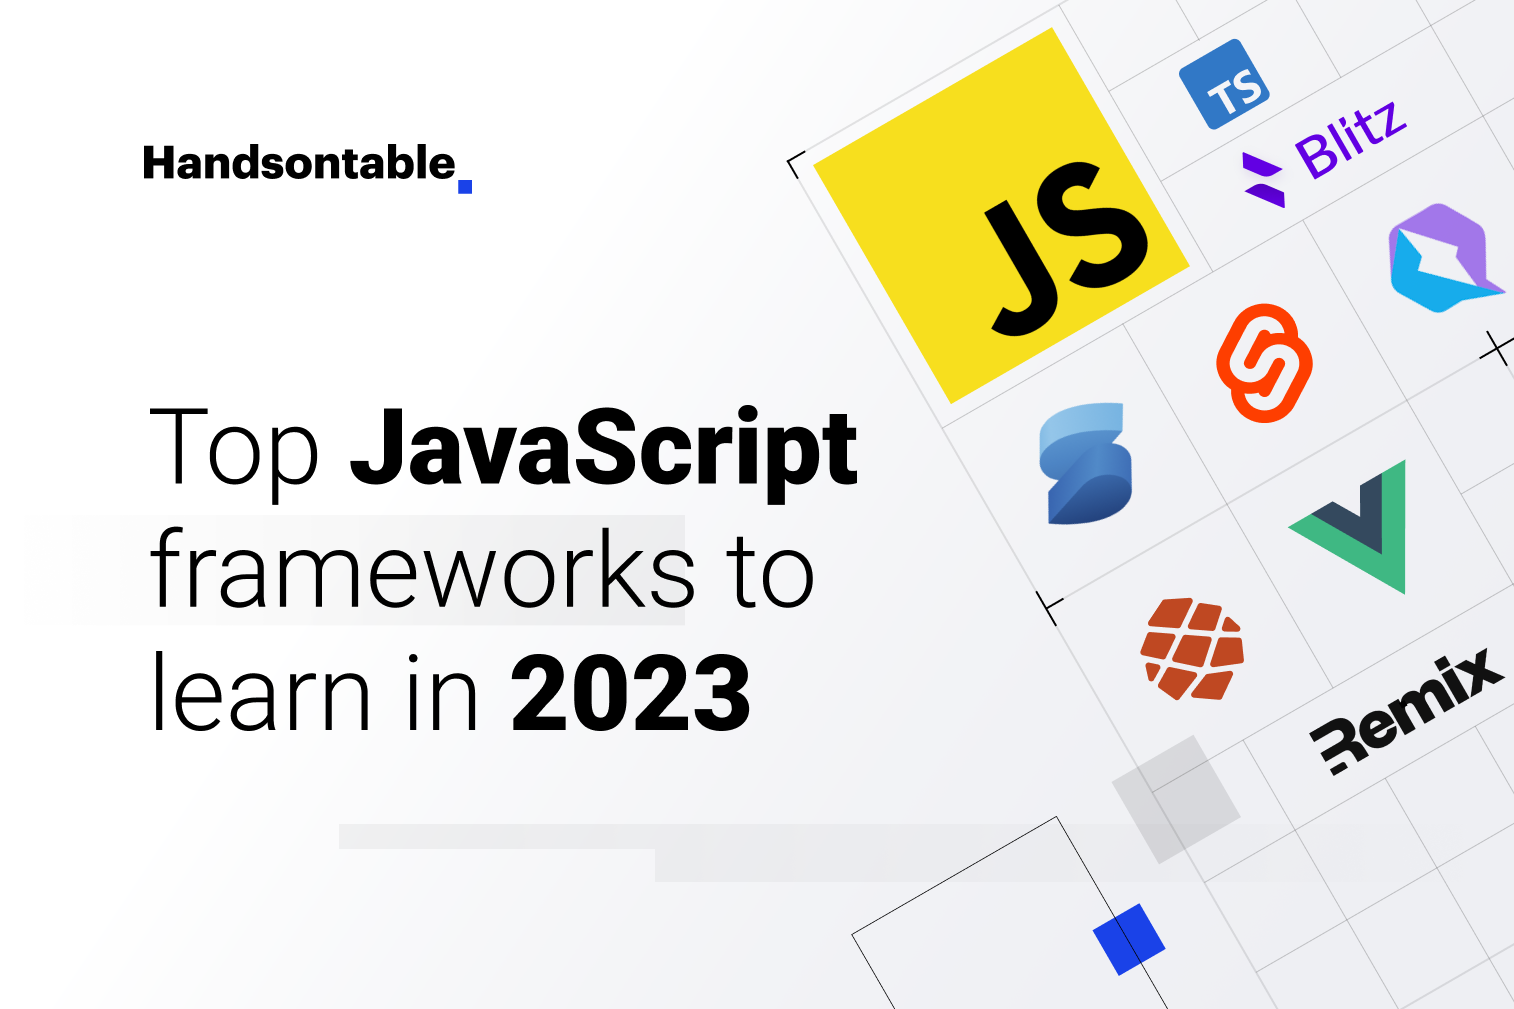 Top JavaScript frameworks to learn in 2023: Blitz, SolidJS, Svelte, and more